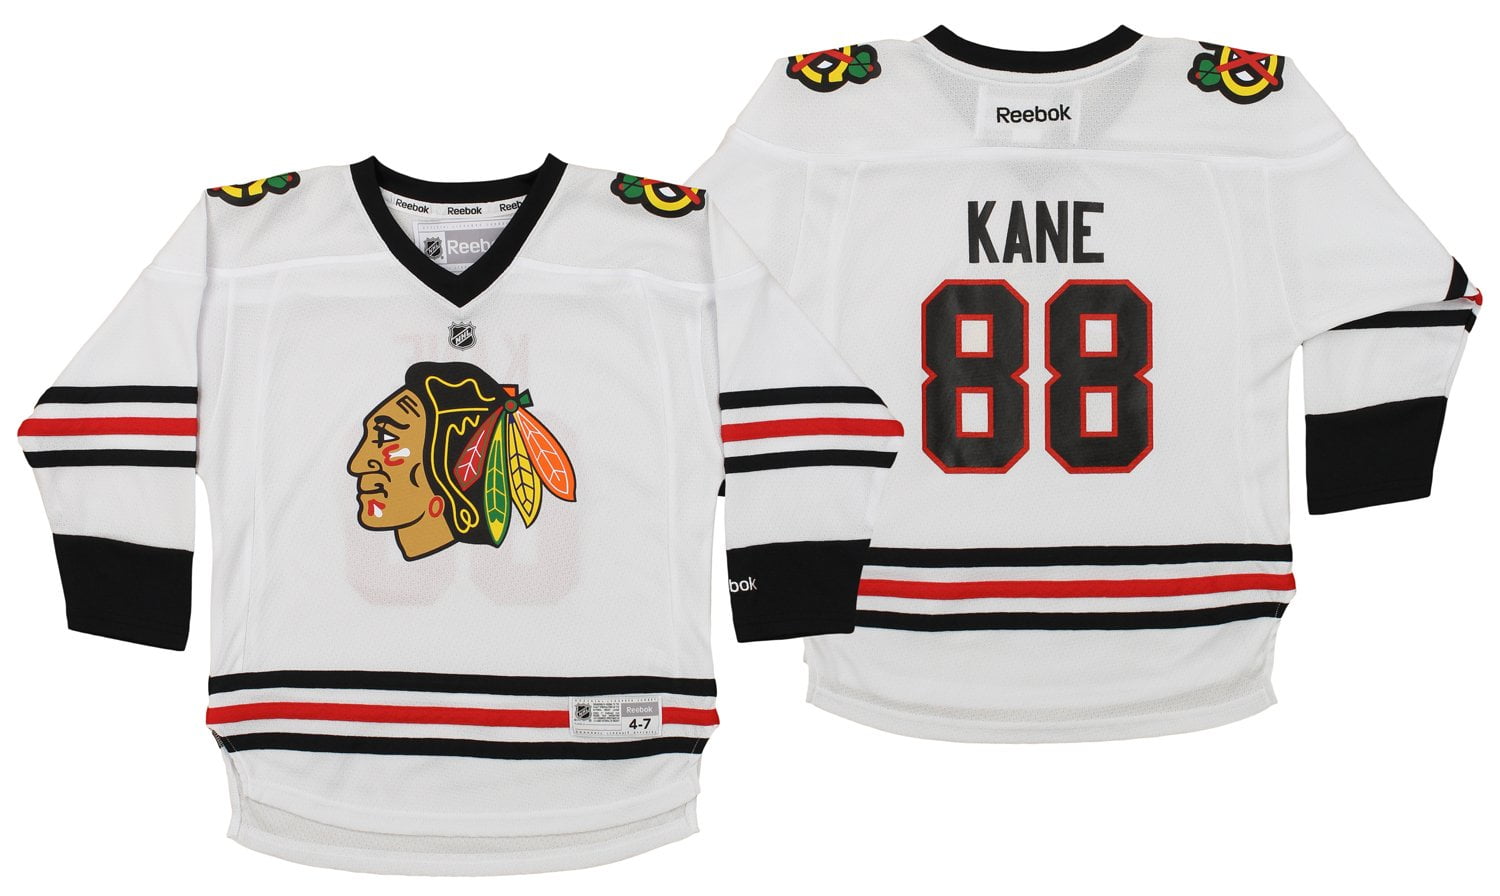 blackhawks jersey with strings